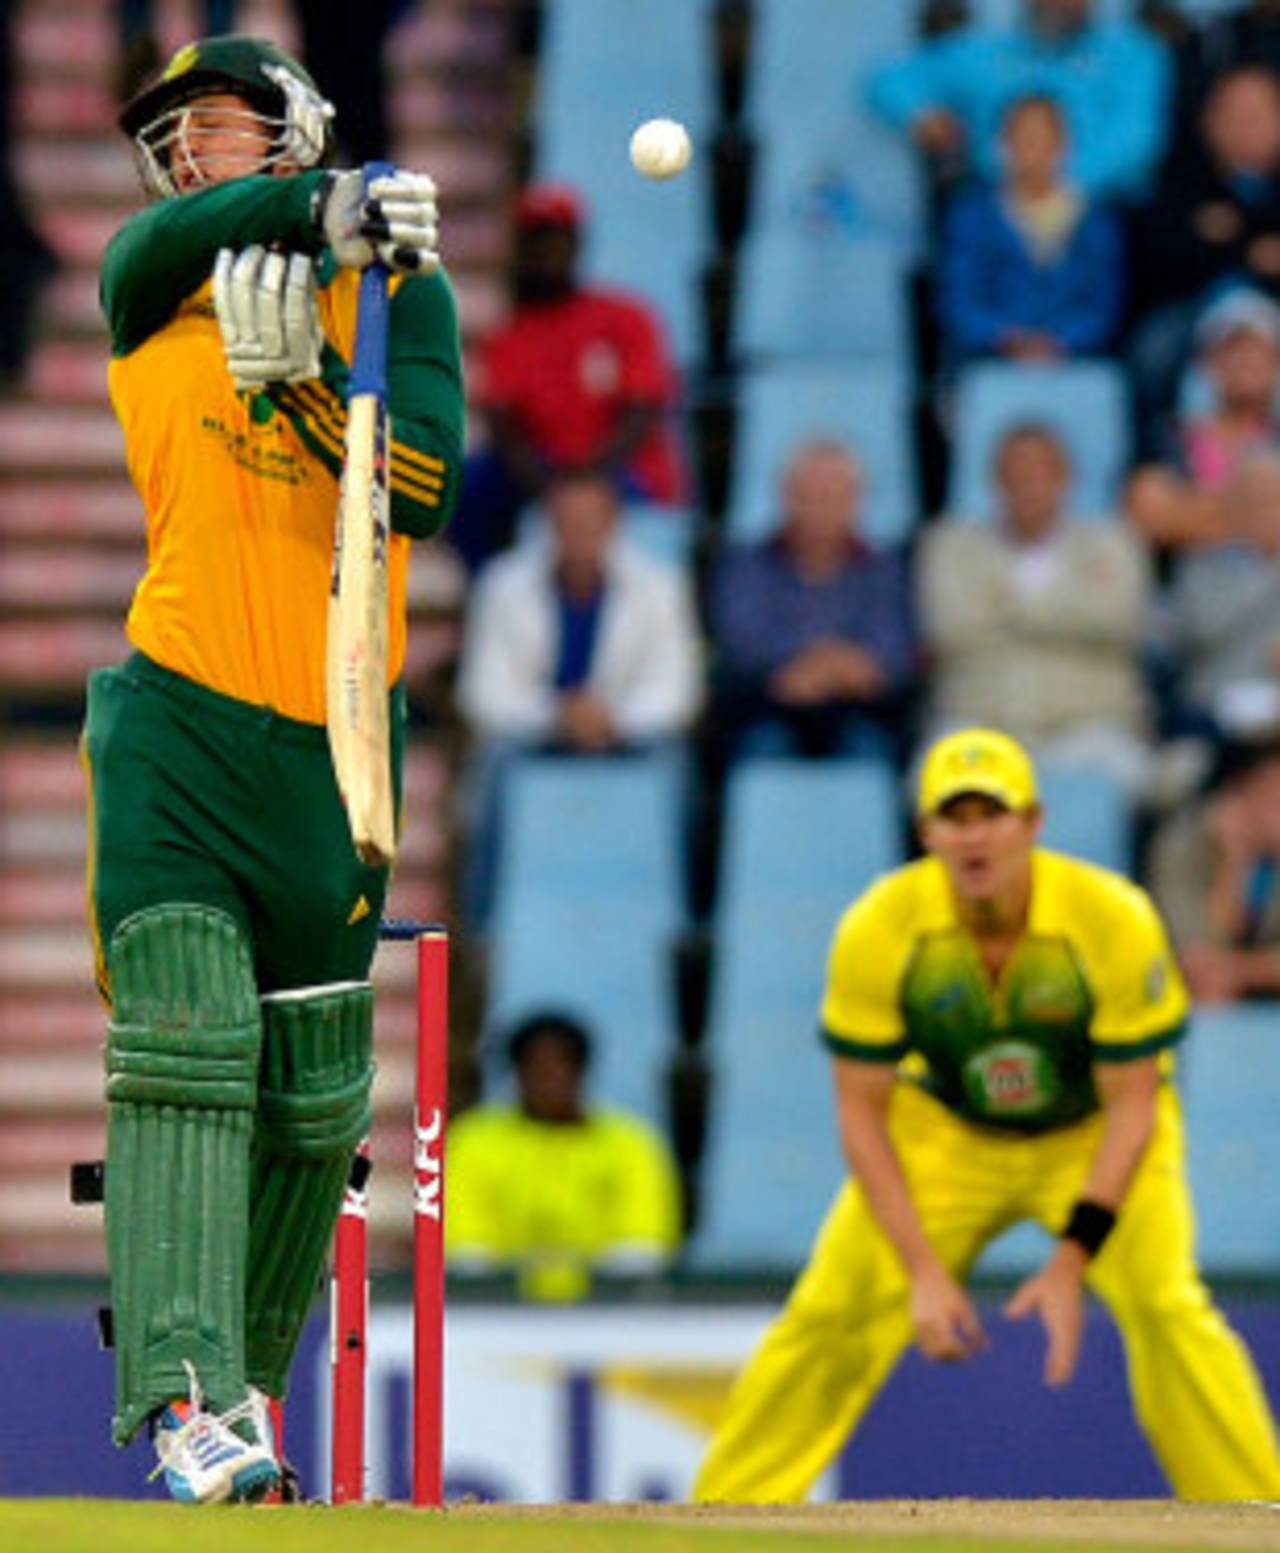 Quinton de Kock takes a blow on the helmet from the 'other Mitchell' - Starc, South Africa v Australia, 3rd T20, Centurion, March 14, 2014